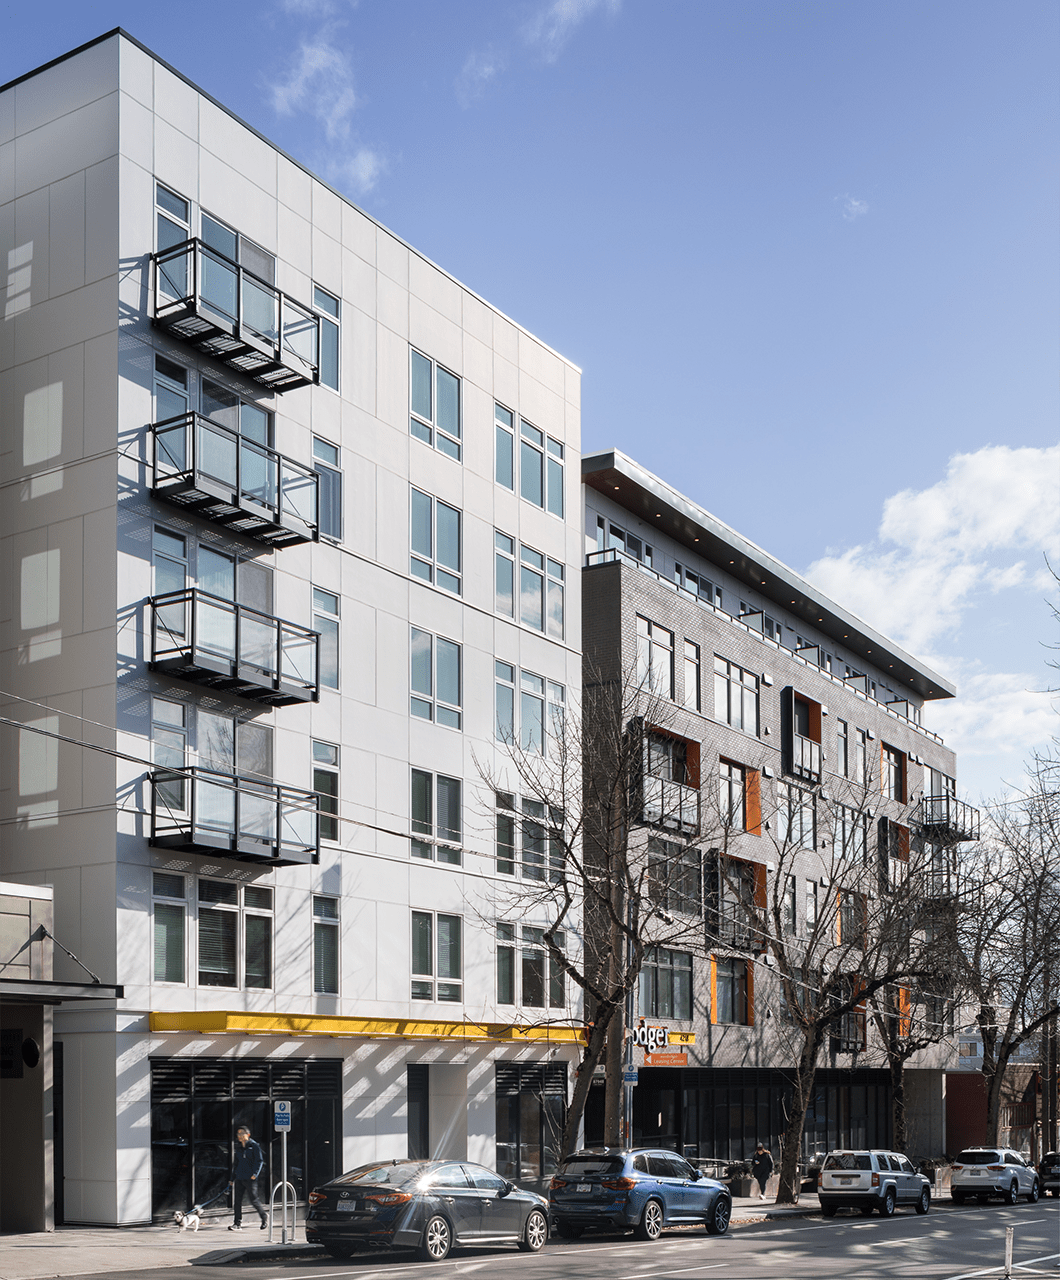 The exterior of the Roosevelt Apartments building features white and gray brick siding with jutted balconies.